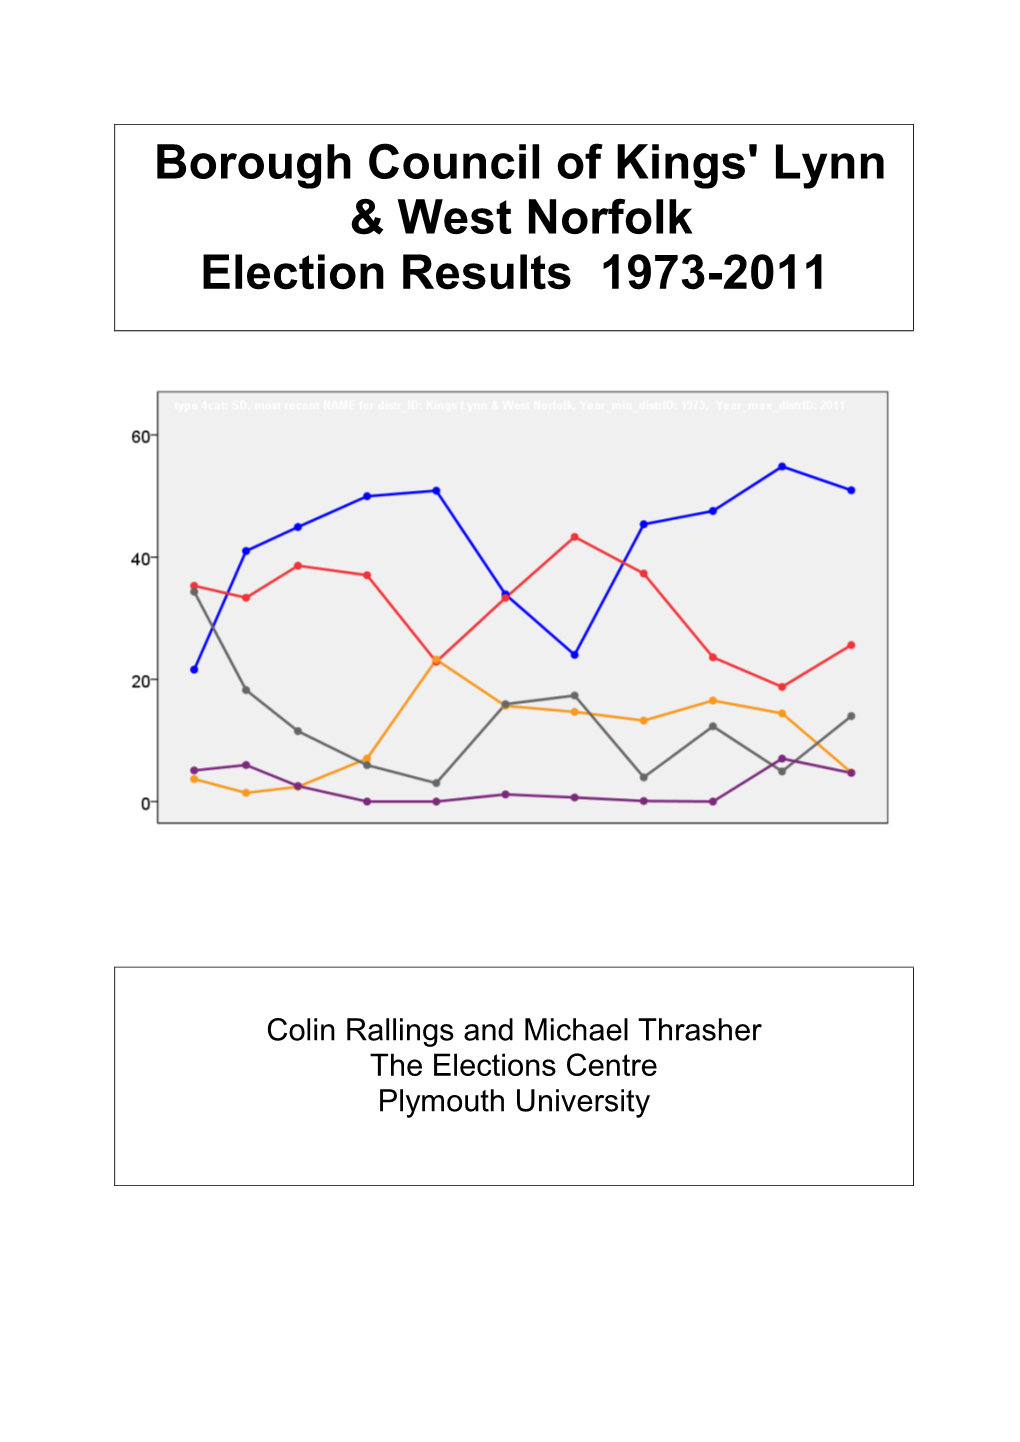 Borough Council of Kings' Lynn & West Norfolk Election Results 1973